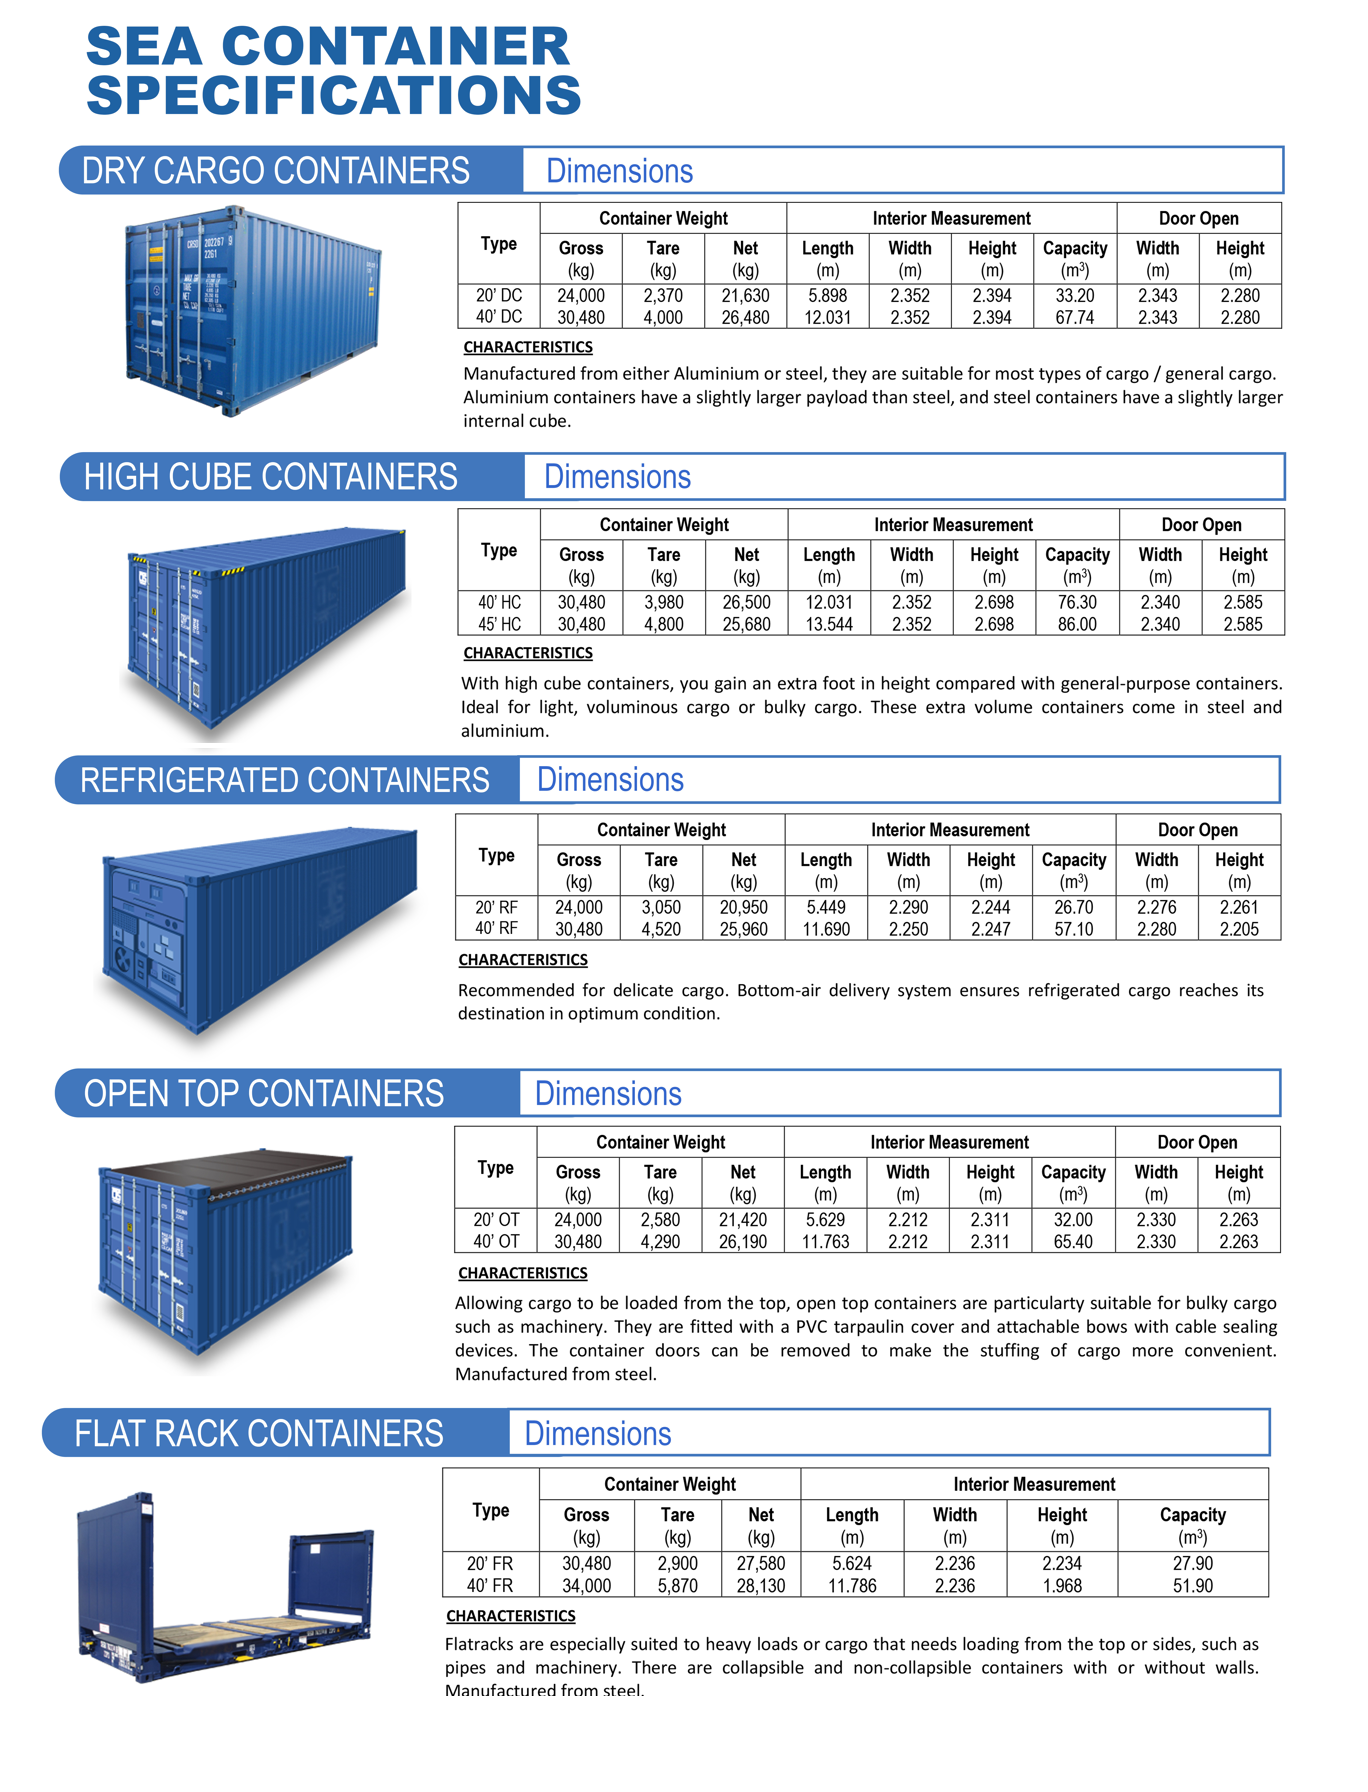 Sea-Container-Specifications